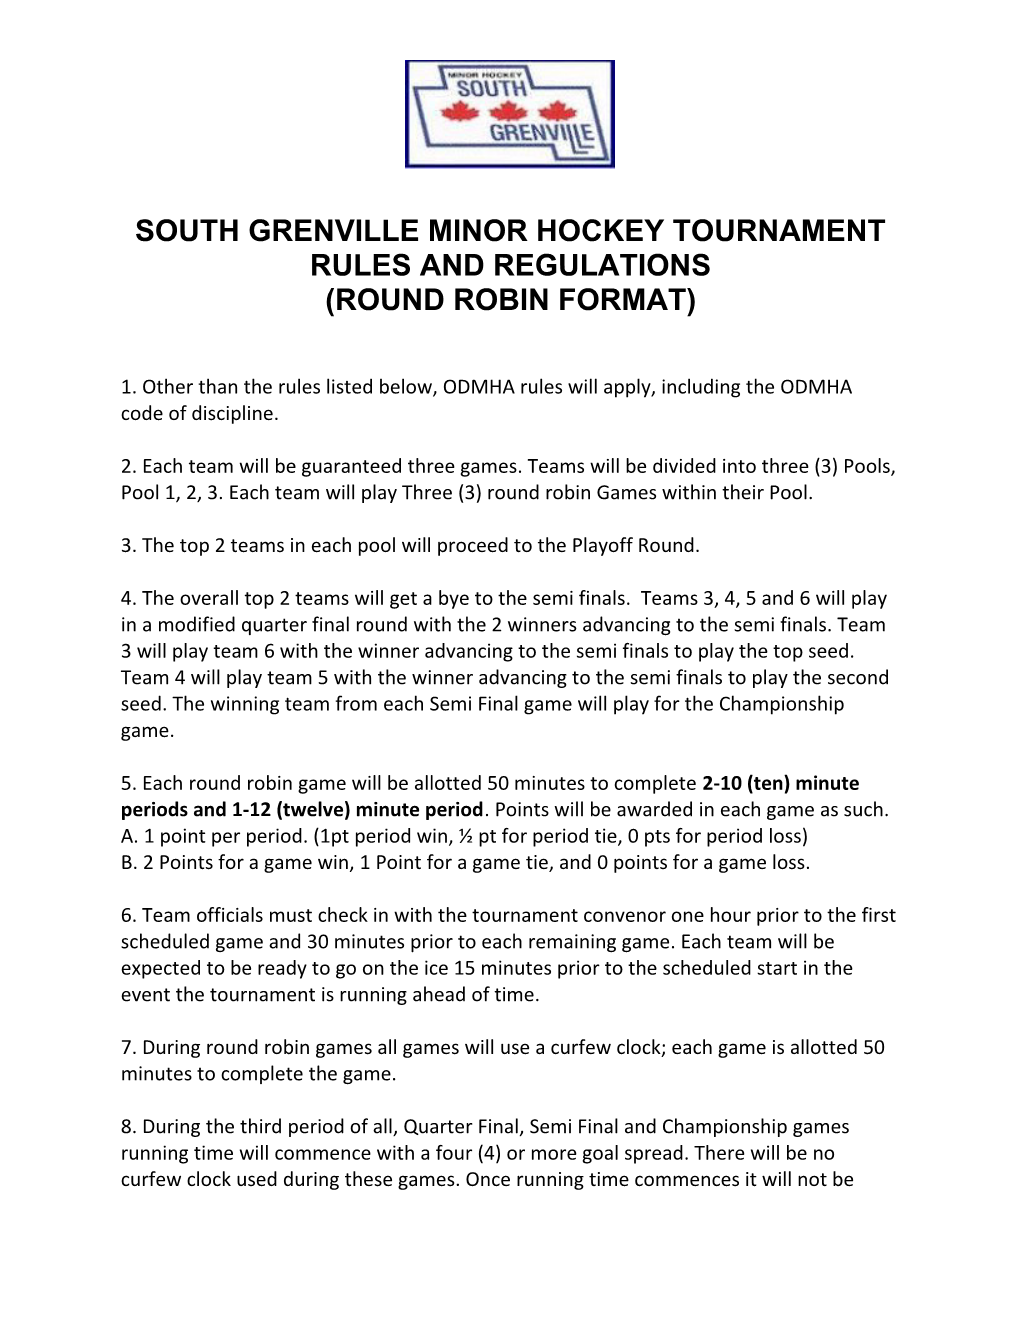 South Grenville Minor Hockey Tournament Rules and Regulations